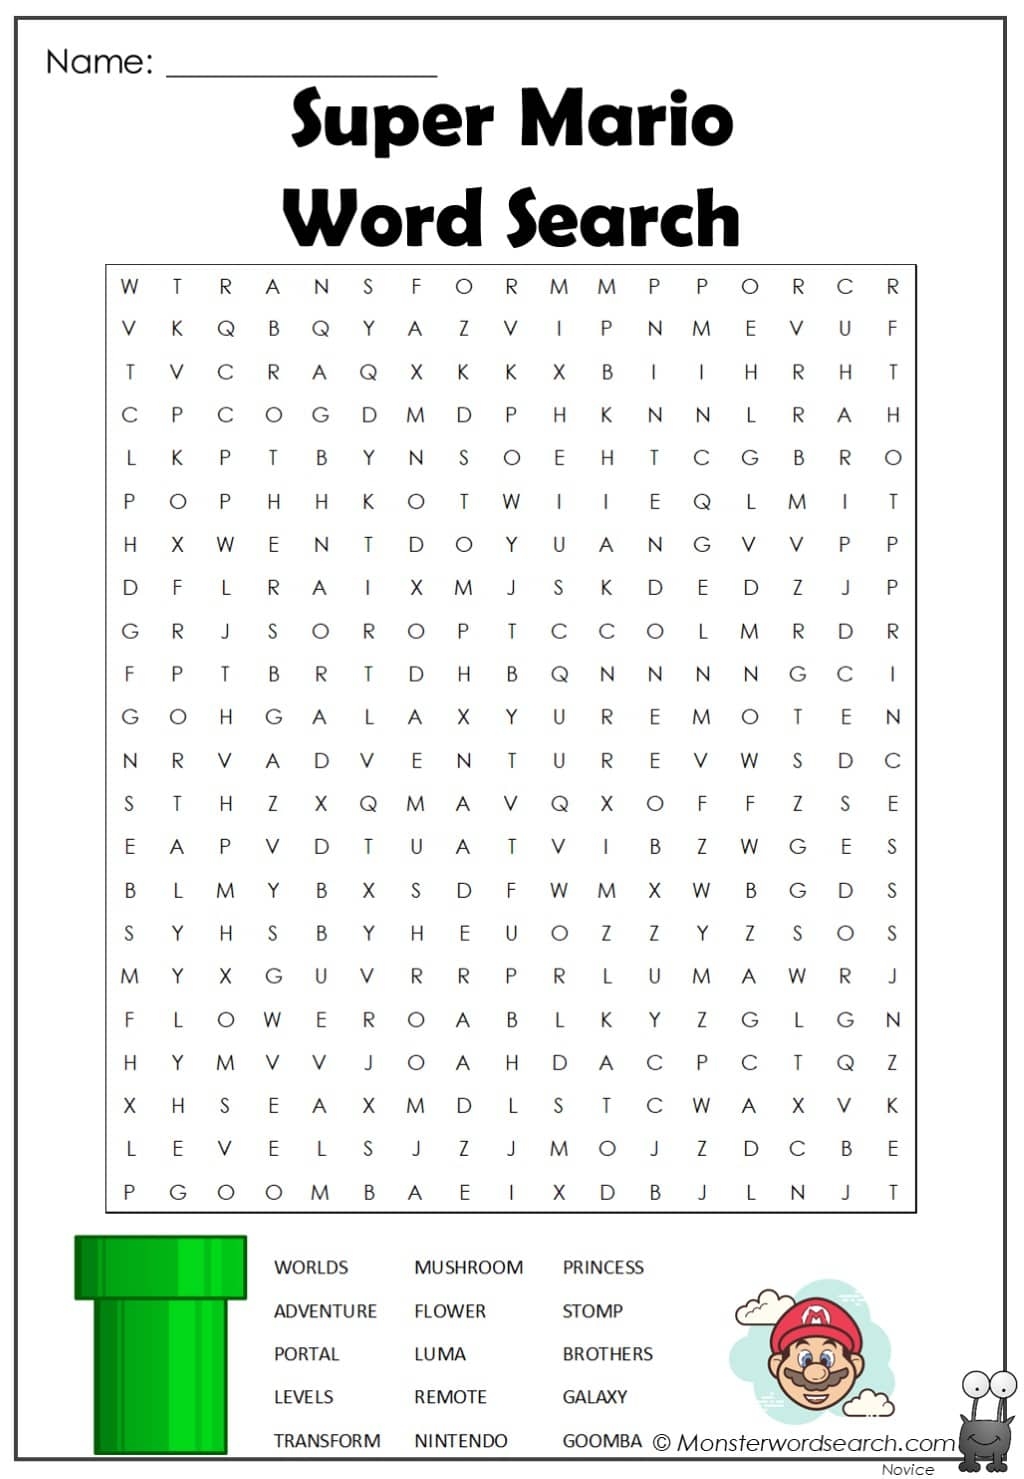 Super Mario Word Search Monster Word Search